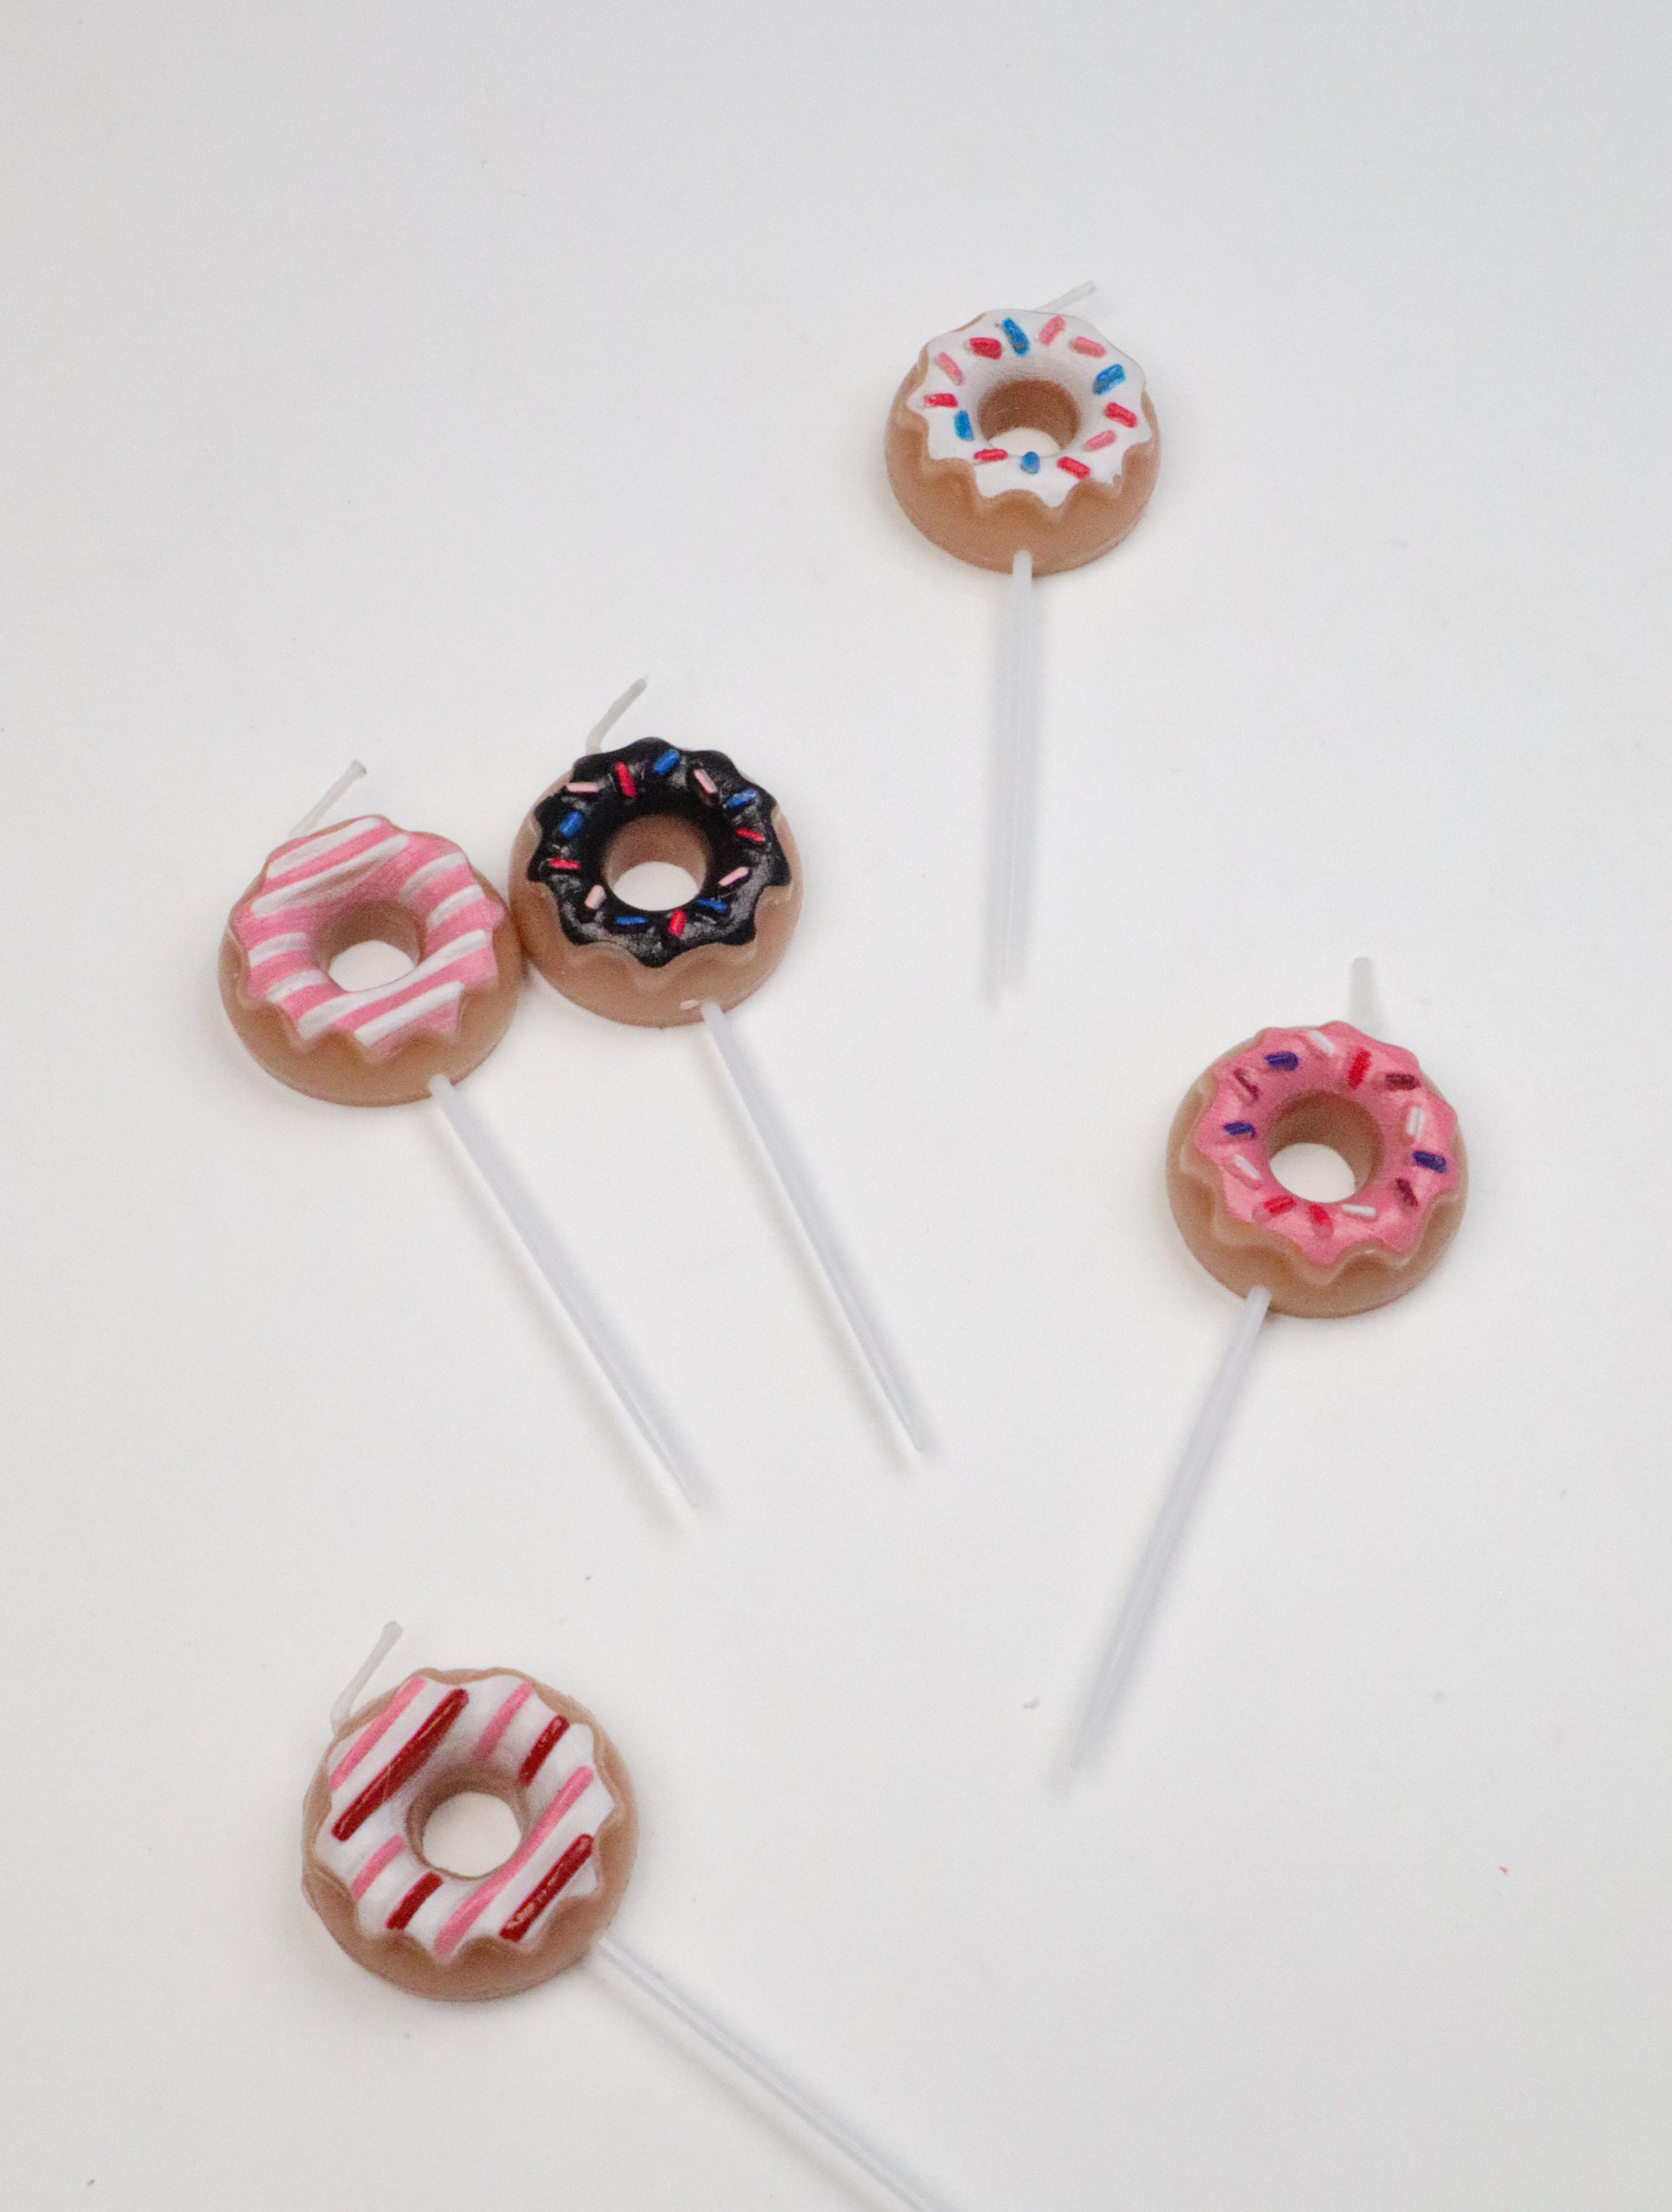 Donut Candle 🍩 / 1 PC